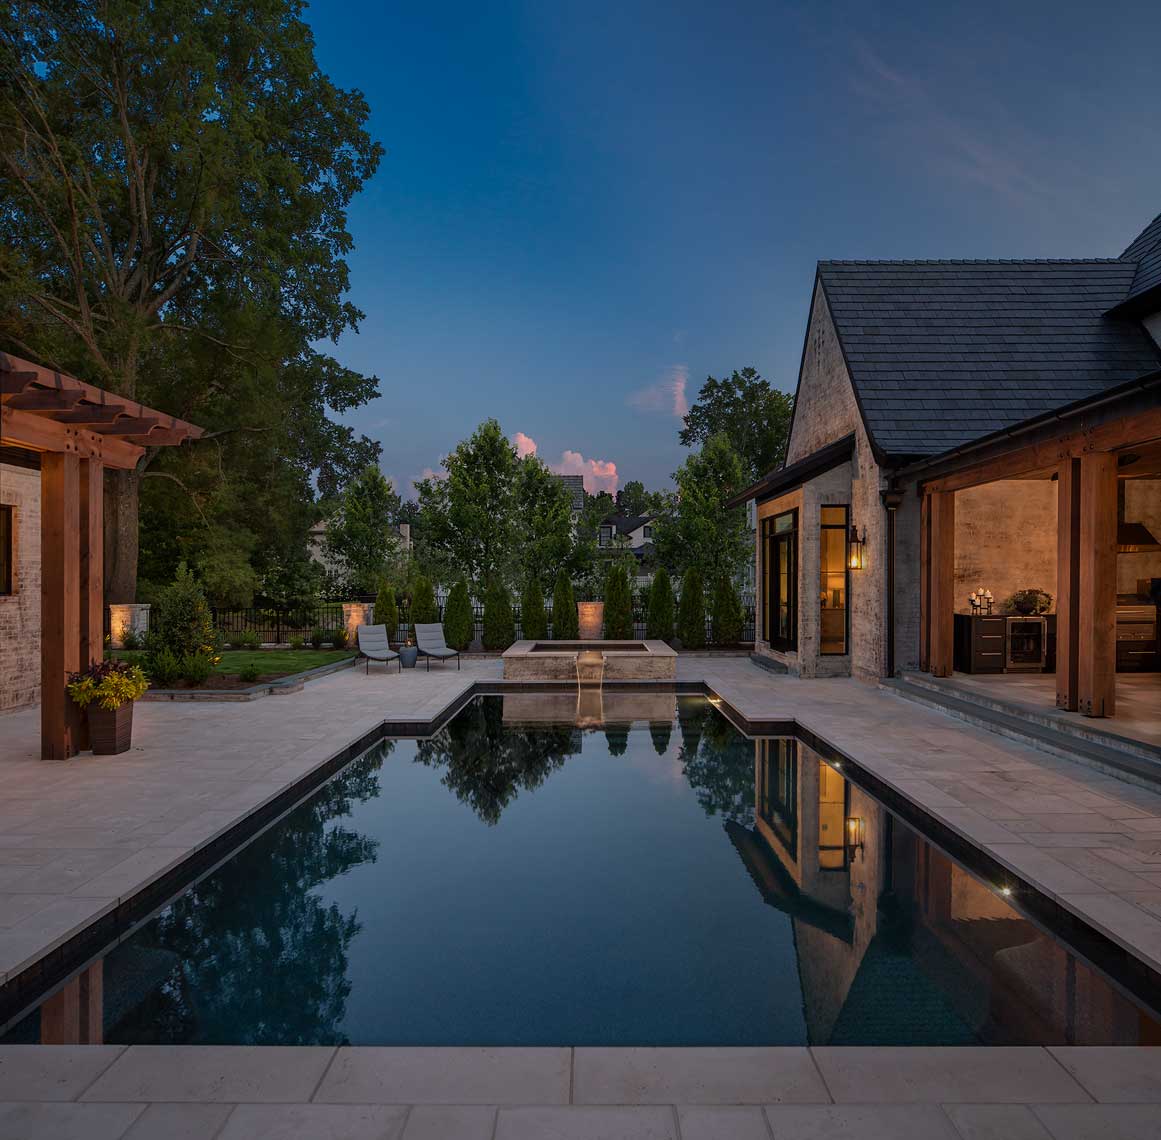 A dramatic twilight view of an Atlanta residence's pool deck